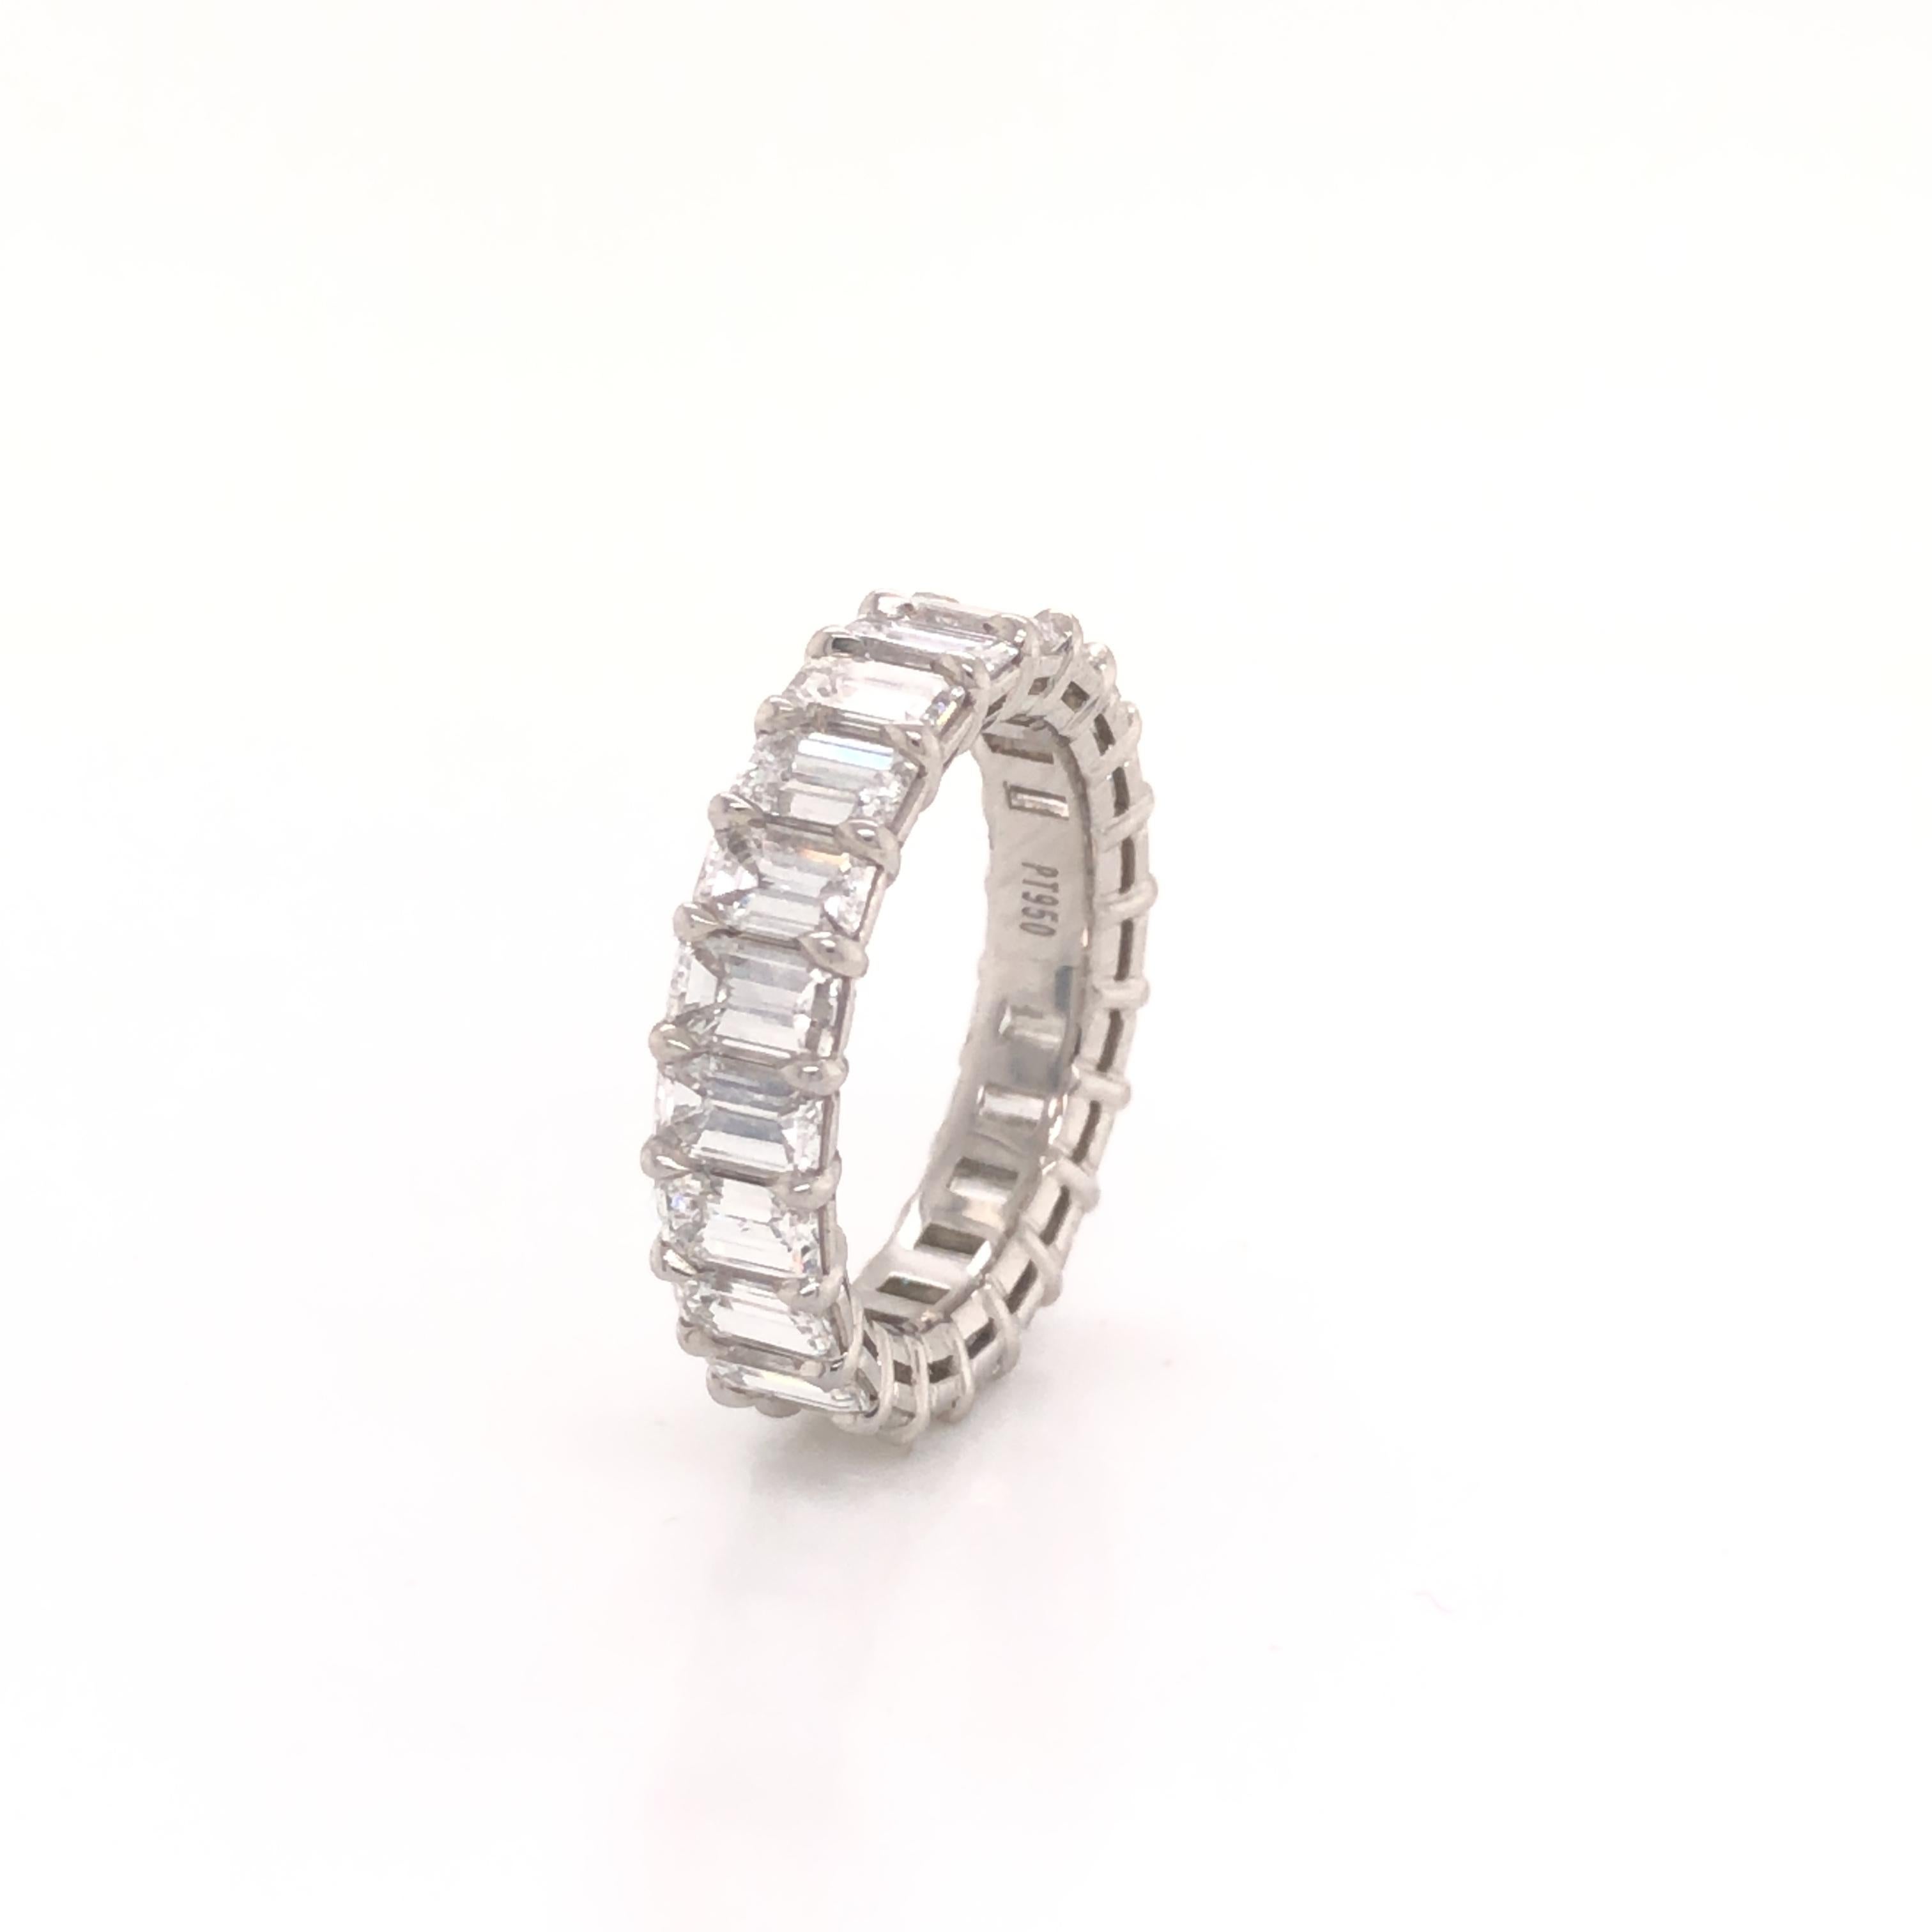 Amazing eternity band crafted in platinum. This gorgeous eternity band is set with emerald cut diamonds 22 in total. The ring displays a 5.40 tcw. Each diamond in this ring weigh approximately 0.25 ct, all diamonds are VVS- VS and shows F-G color.